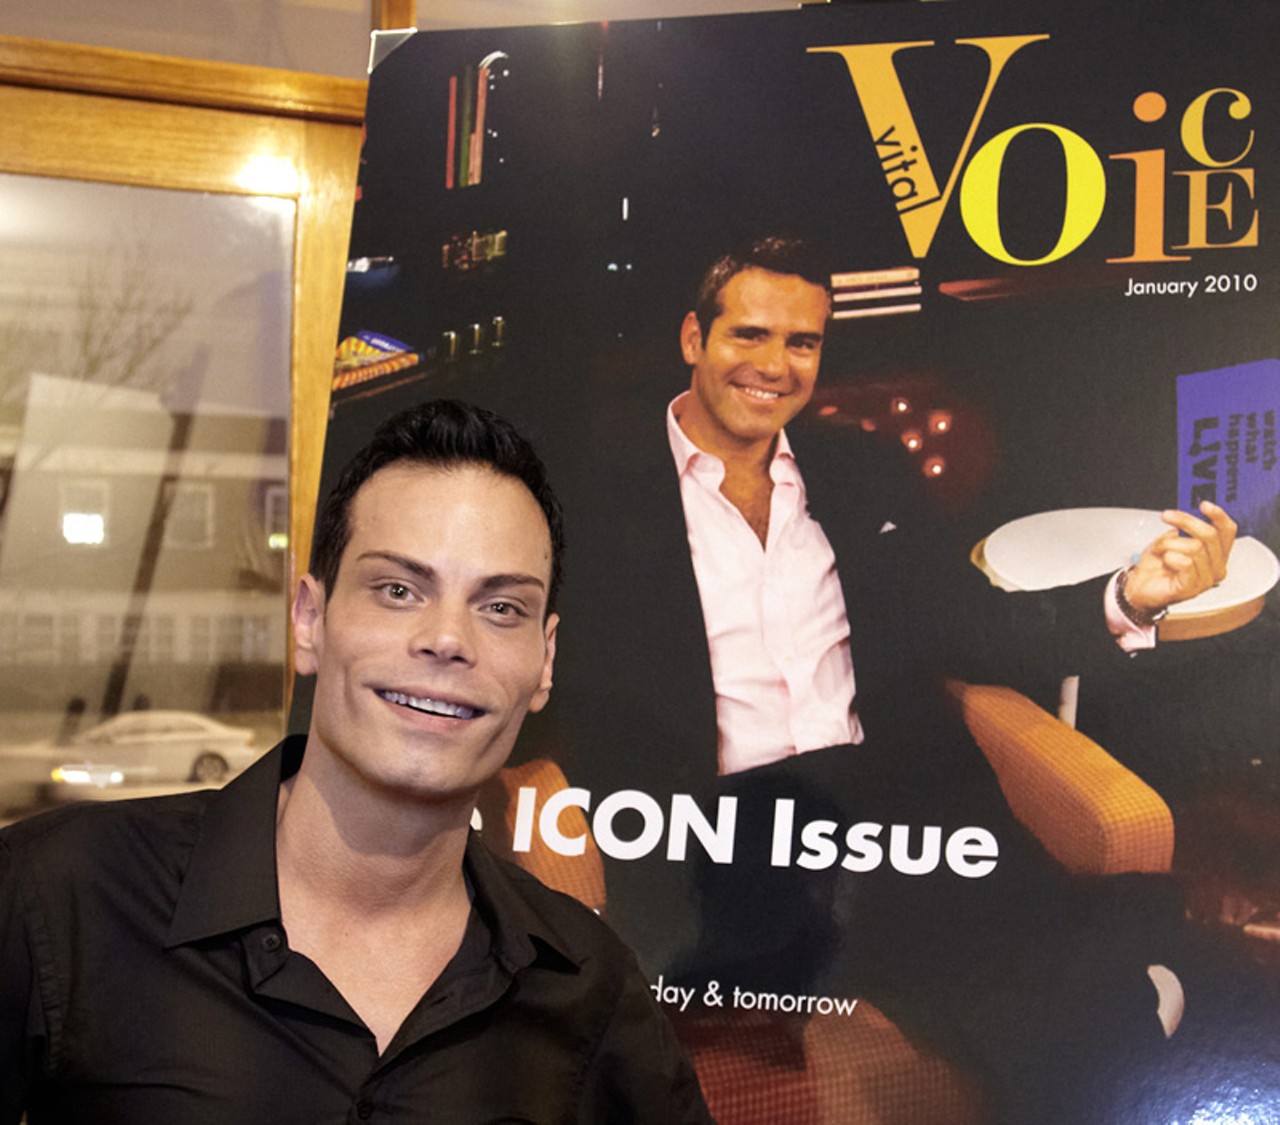 Publisher Darin Slyman and the cover of the new Vital Voice.